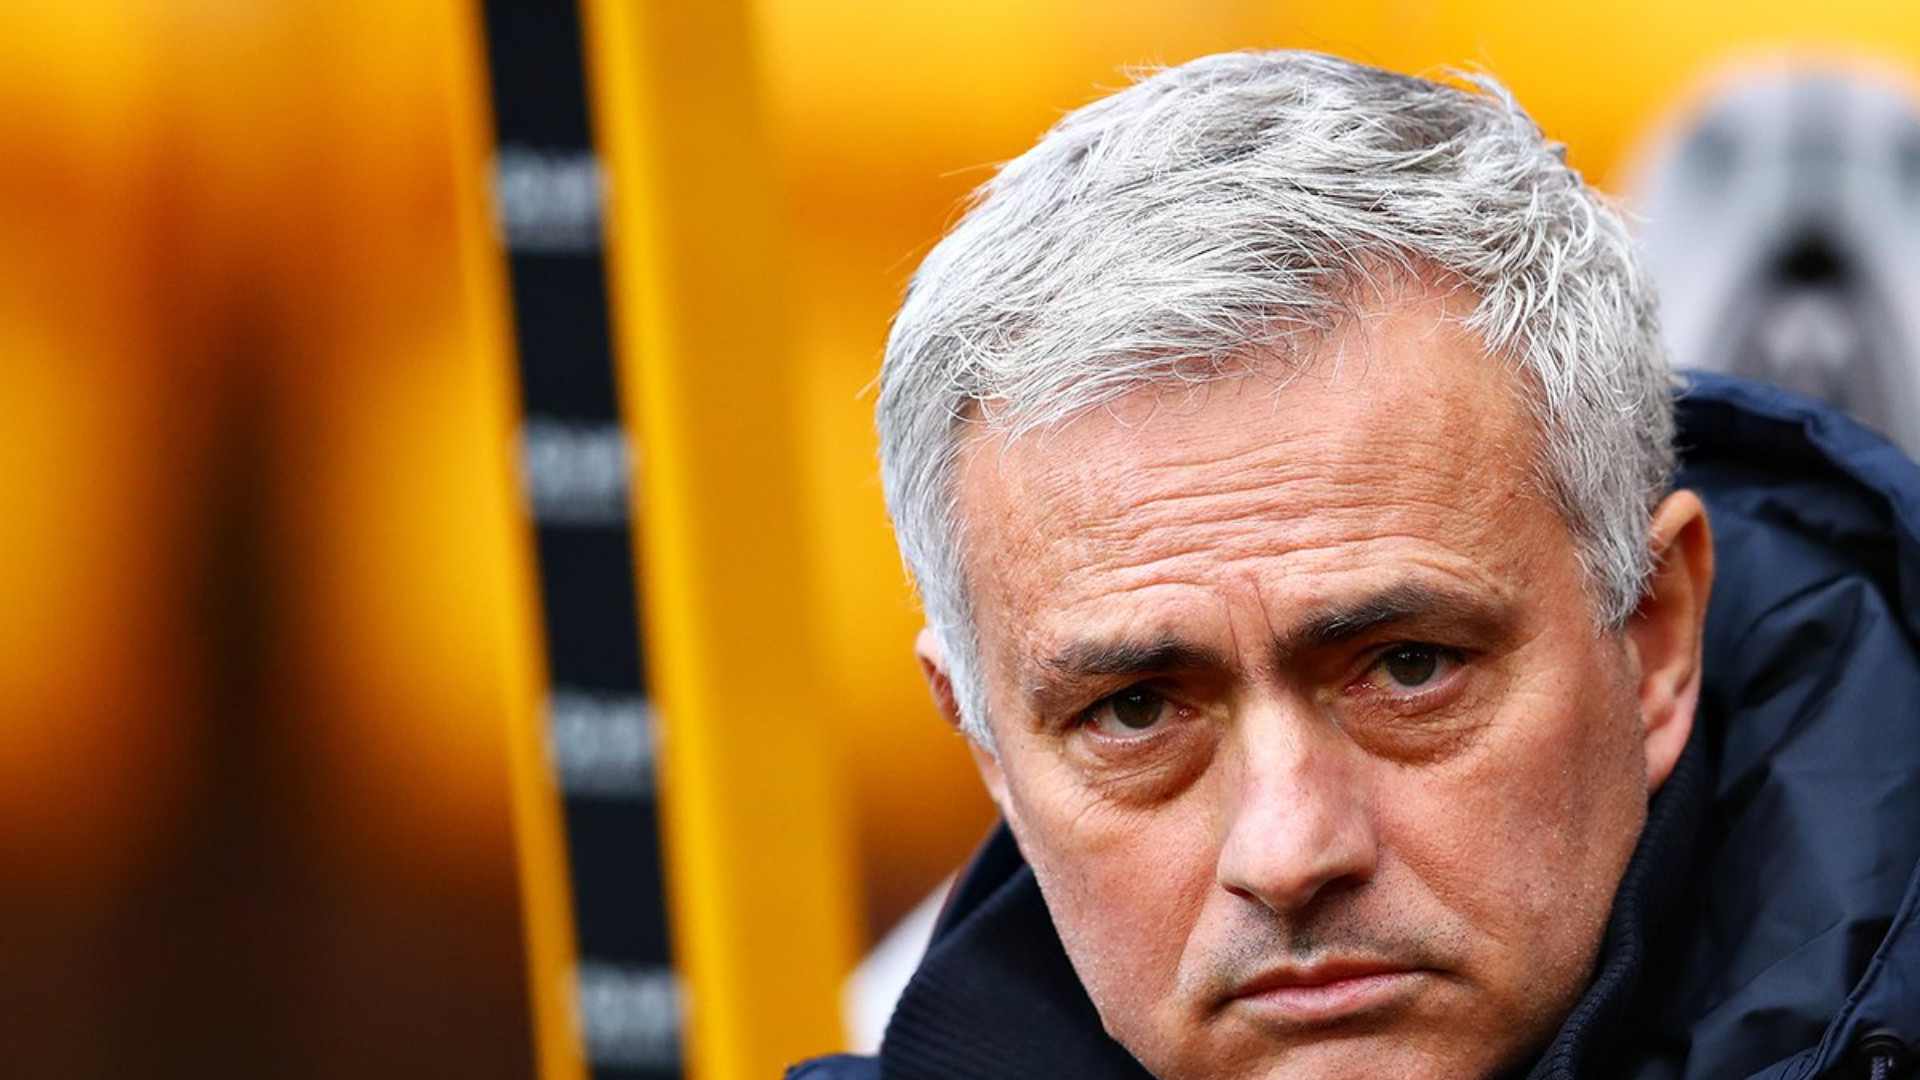 Jose Mourinho has been sacked by Tottenham Hotspur. (Image Credit: Twitter)